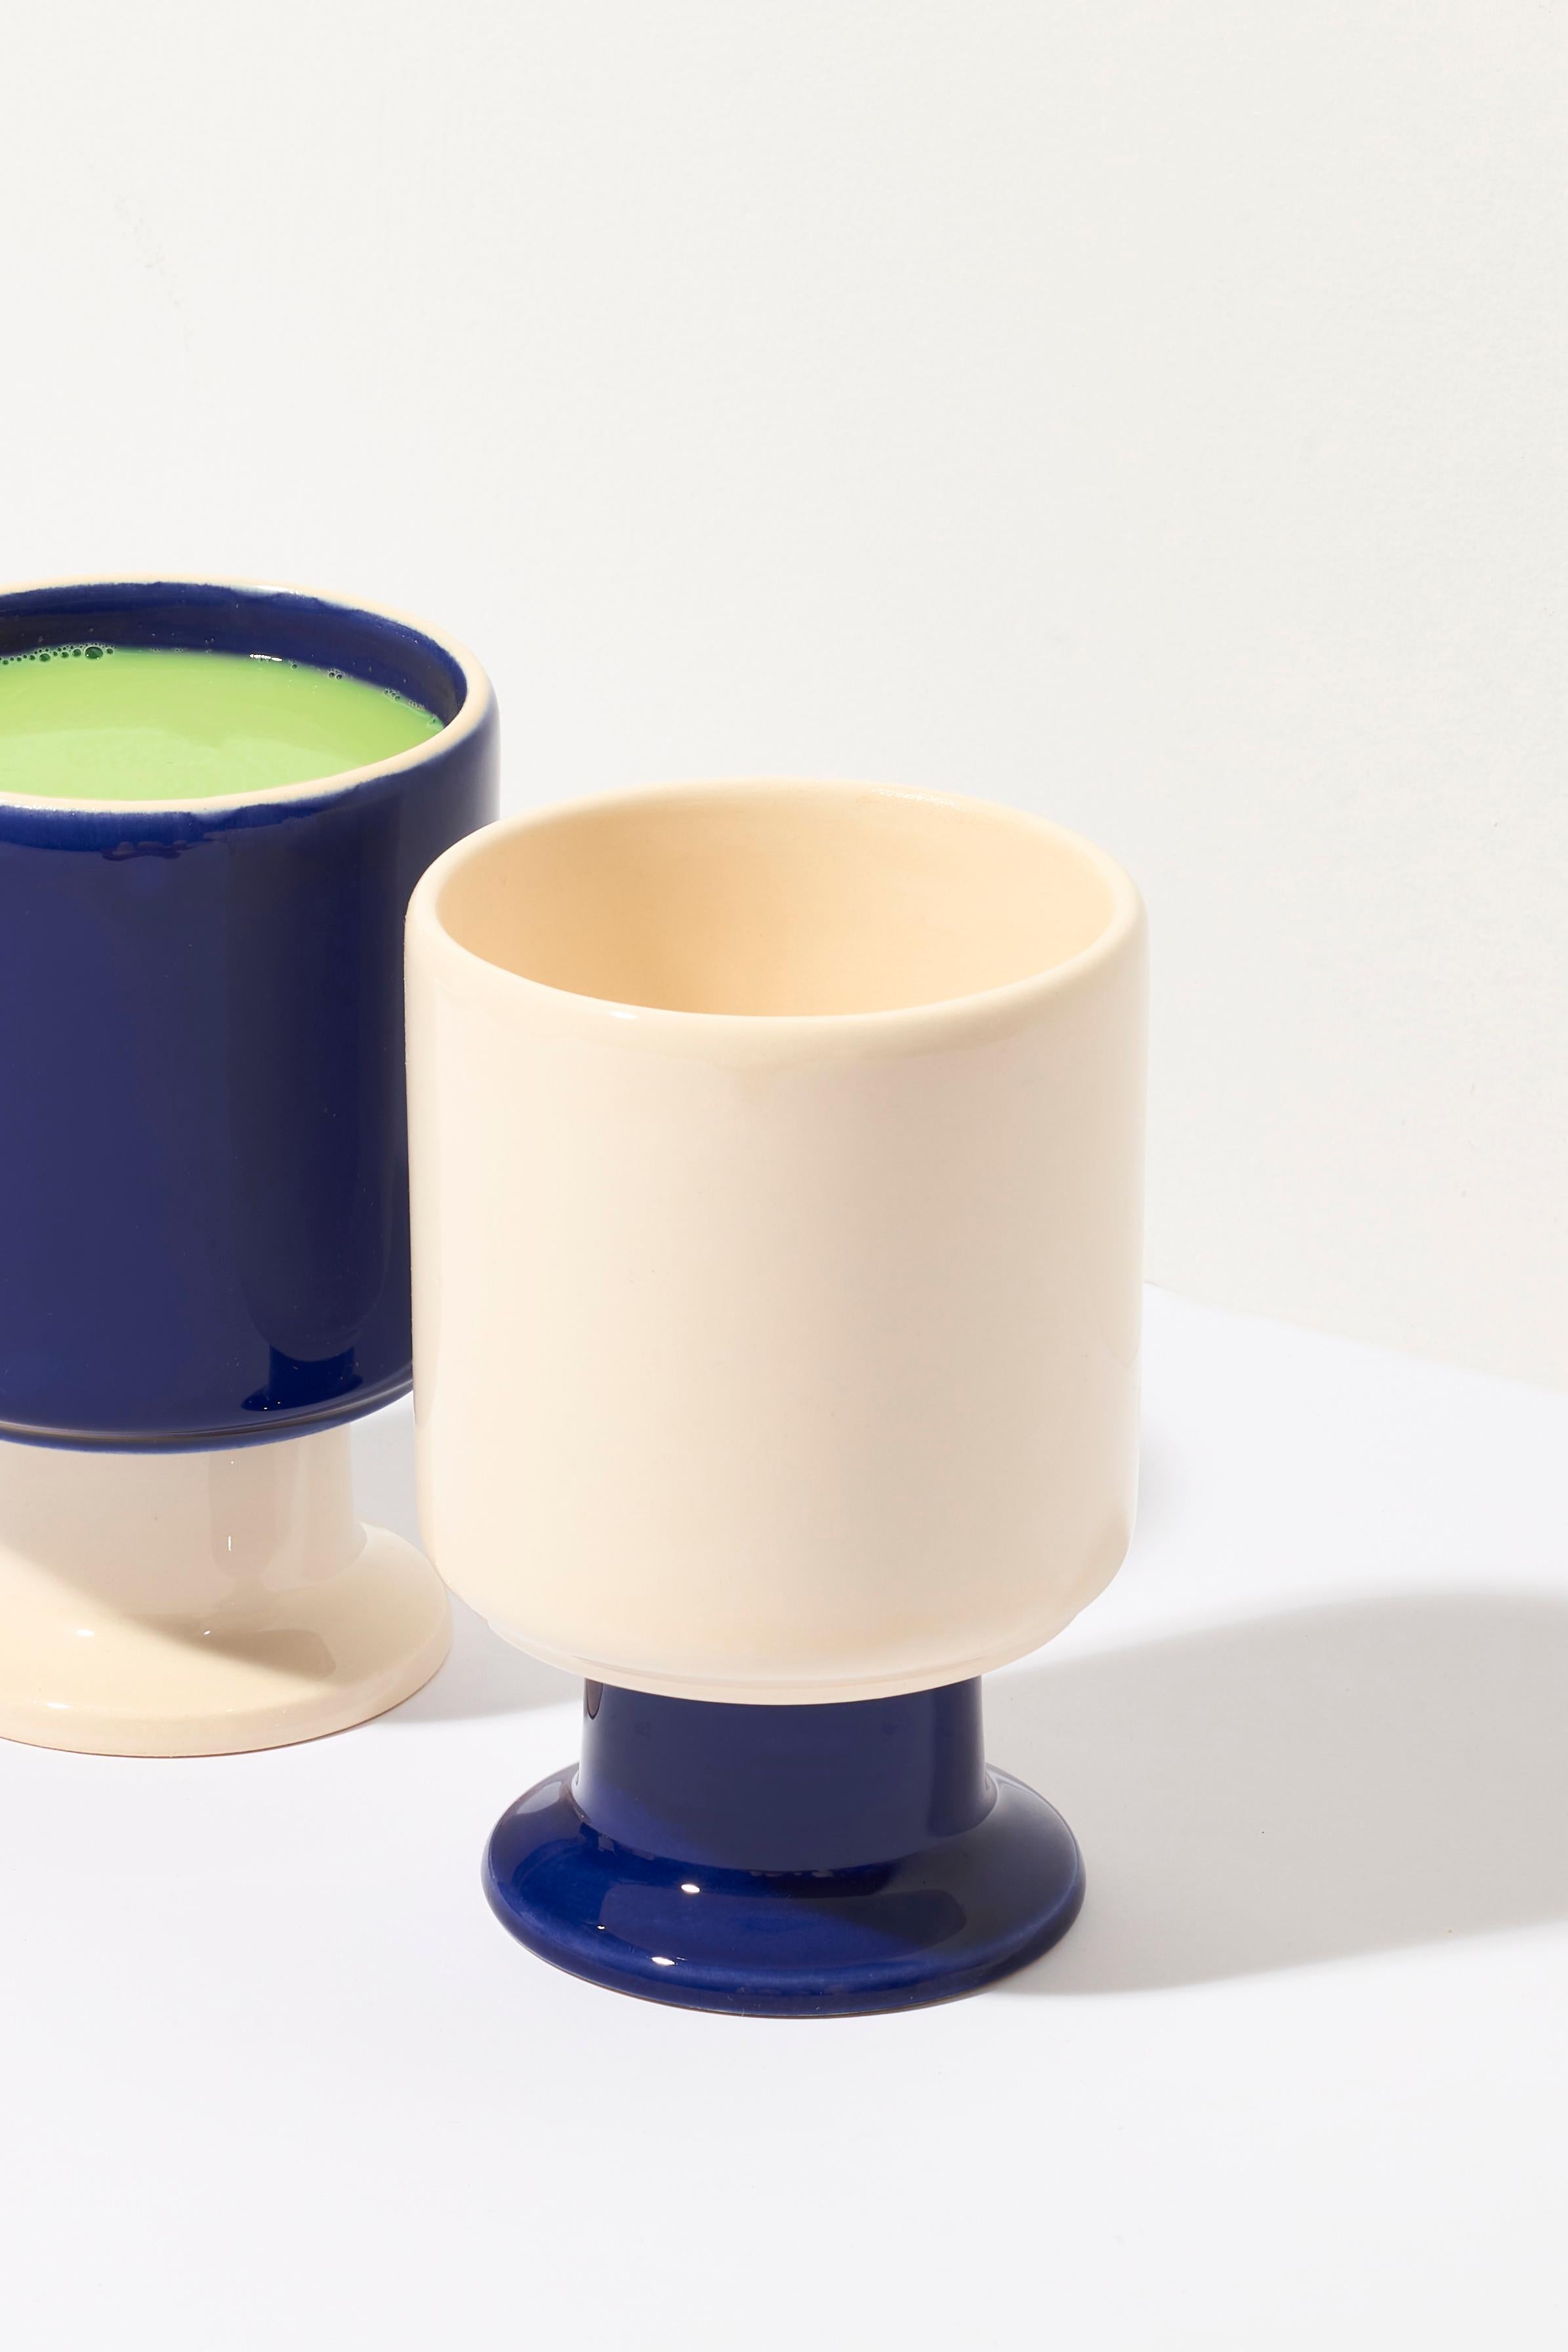 WIT mug / set of 2.

The WIT cup is a multifunctional vessel with a playful stem. It can become your favorite coffee cup, a dessert bowl, a container for pens, or other favorite accessories. WIT chalices can be stacked to create stable towers,